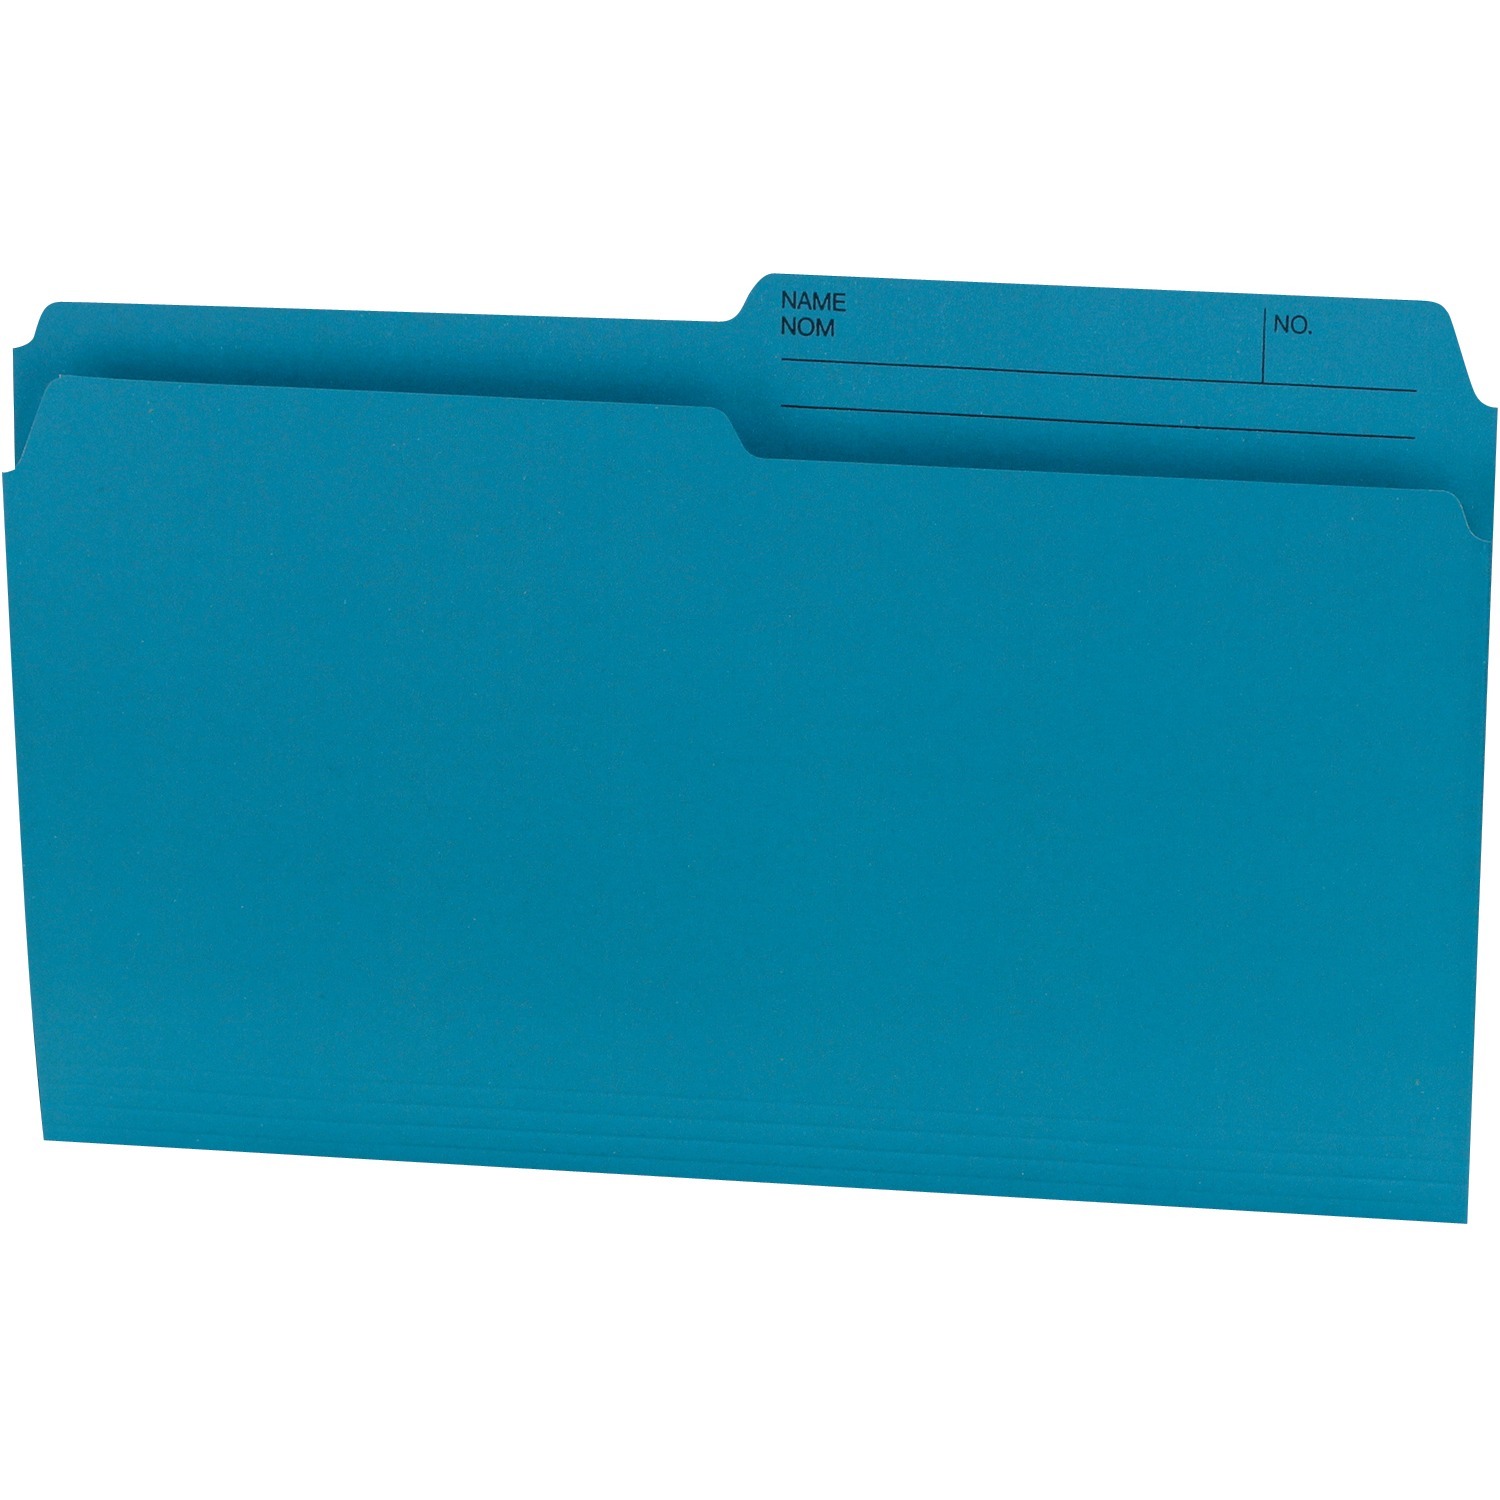 Hilroy Offix Reversable Legal Size 8 1/2'' x 14'' File Folders - Teal - Recycled - 100 / Box